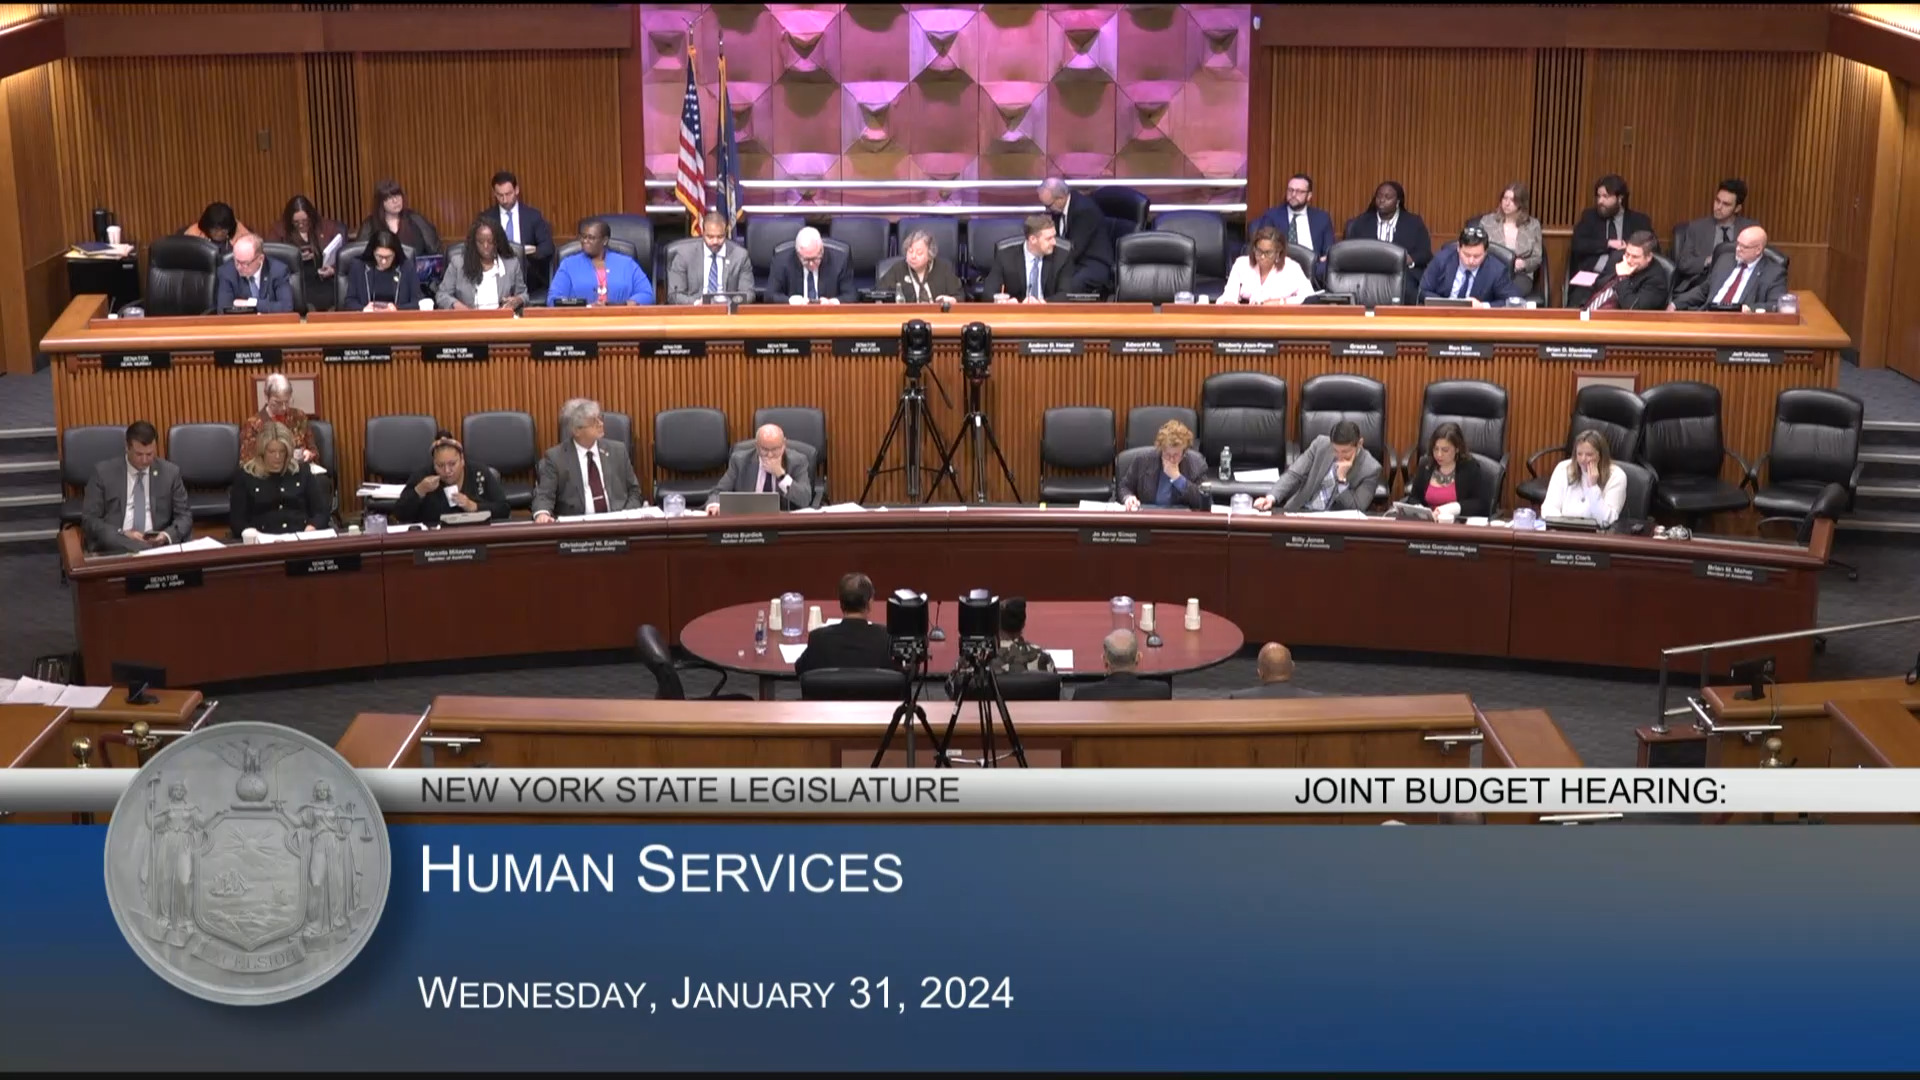 Veterans’ Affairs Commissioner Testifies During Budget Hearing on Human Services